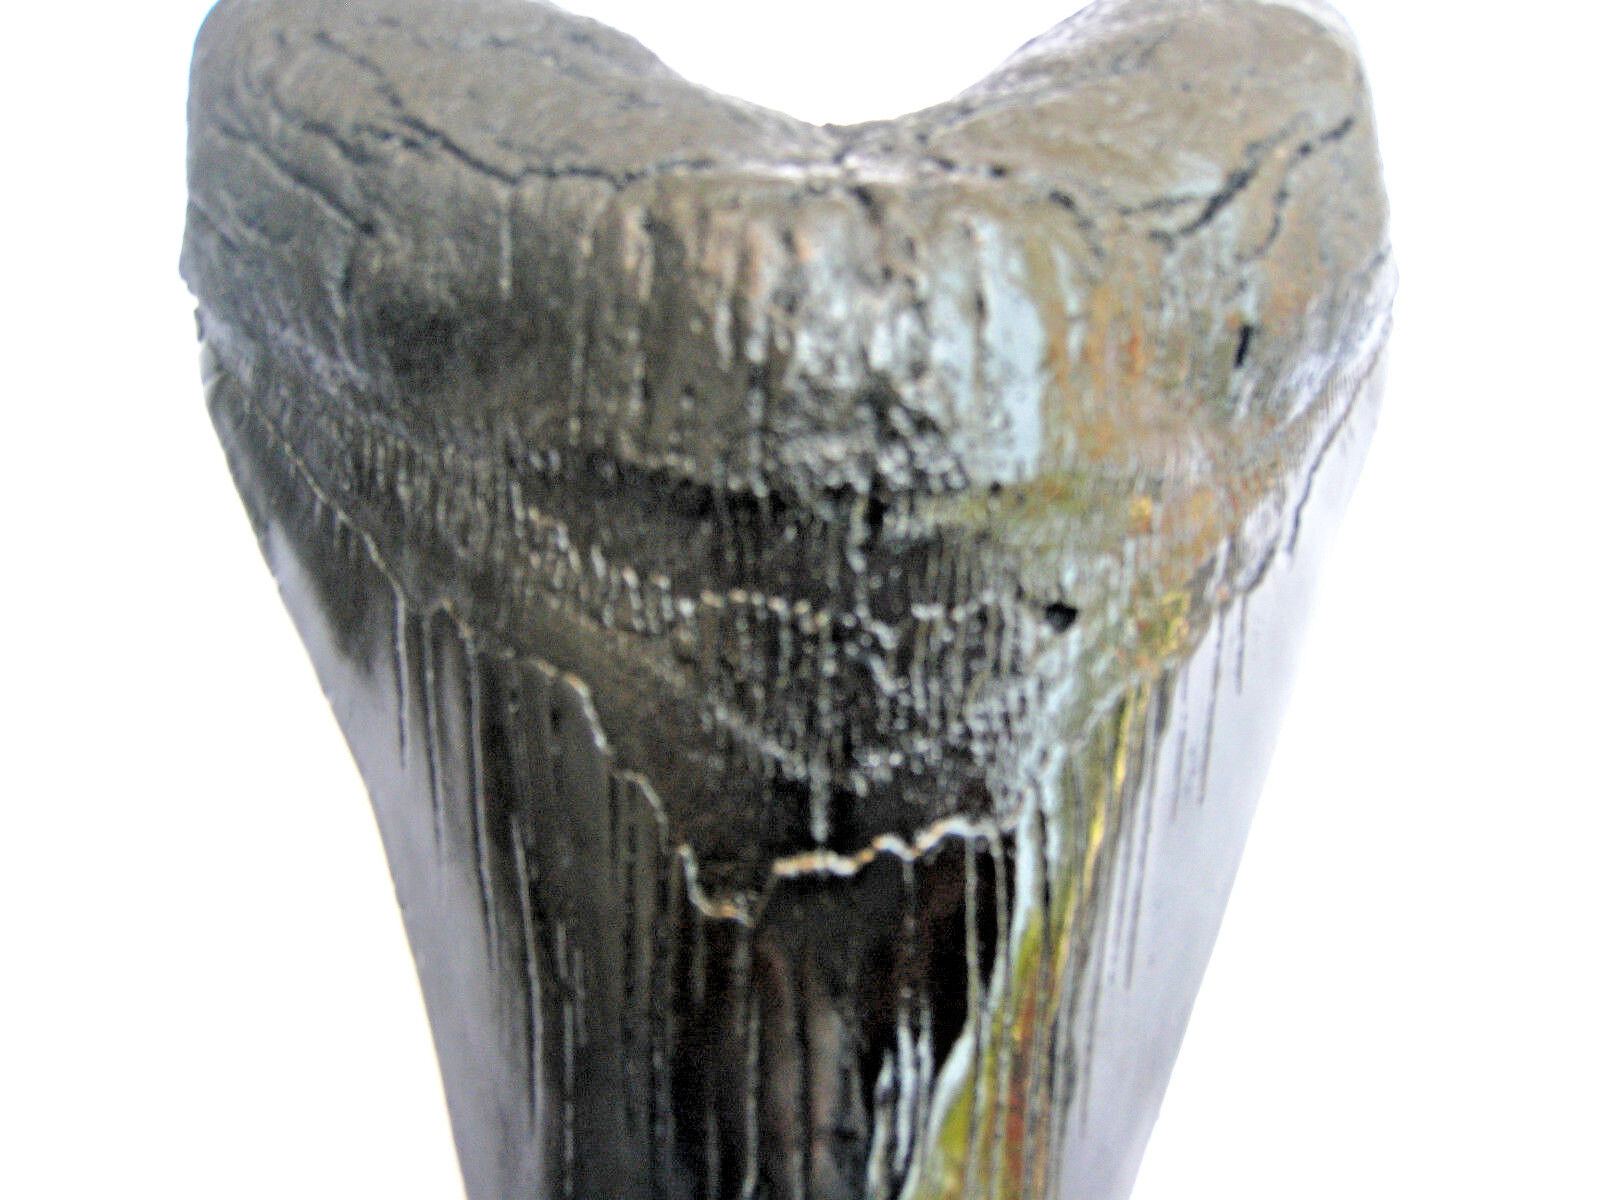 7 INCH LONG MEGALODON TOOTH REPLICA BIG FOSSIL GIANT RELIC TEETH HUGE SHARK NEW